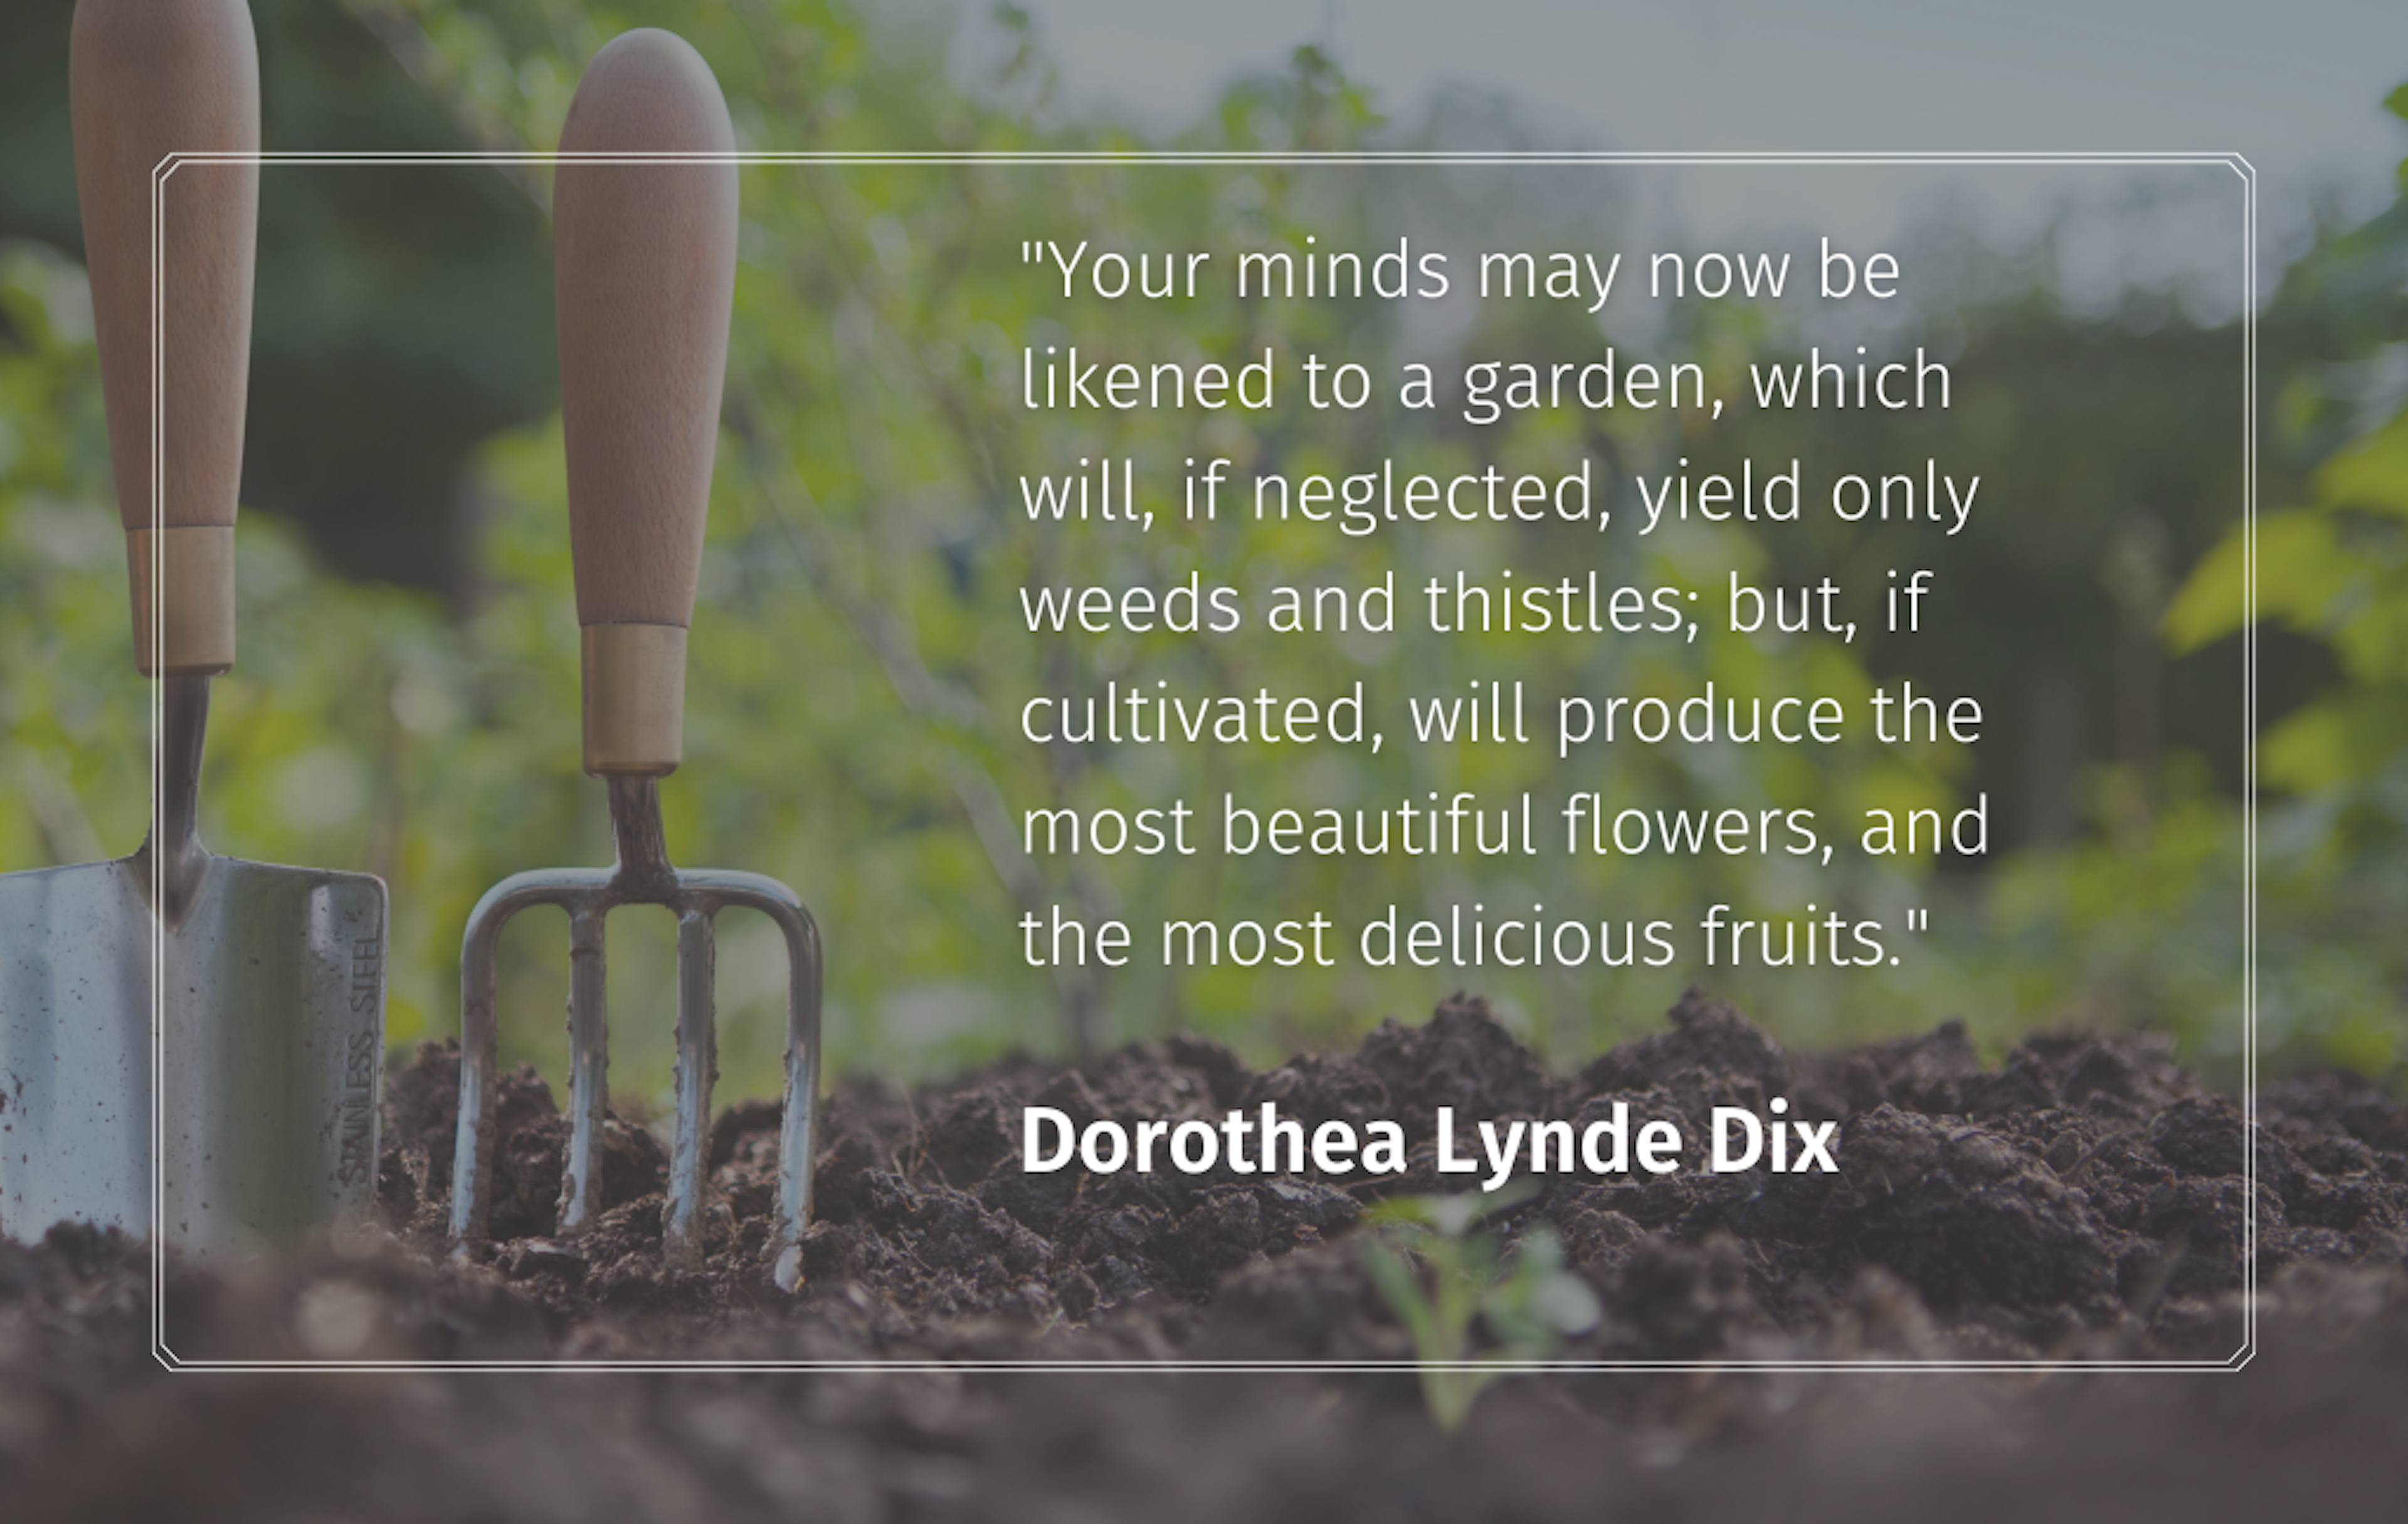 Quote: "Your minds may now be likened to a garden, which will, if neglected, yield only weeds and thistles; but, if cultivated, will produce the most beautiful flowers, and the most delicious fruits." Dorothea Lynde Dix